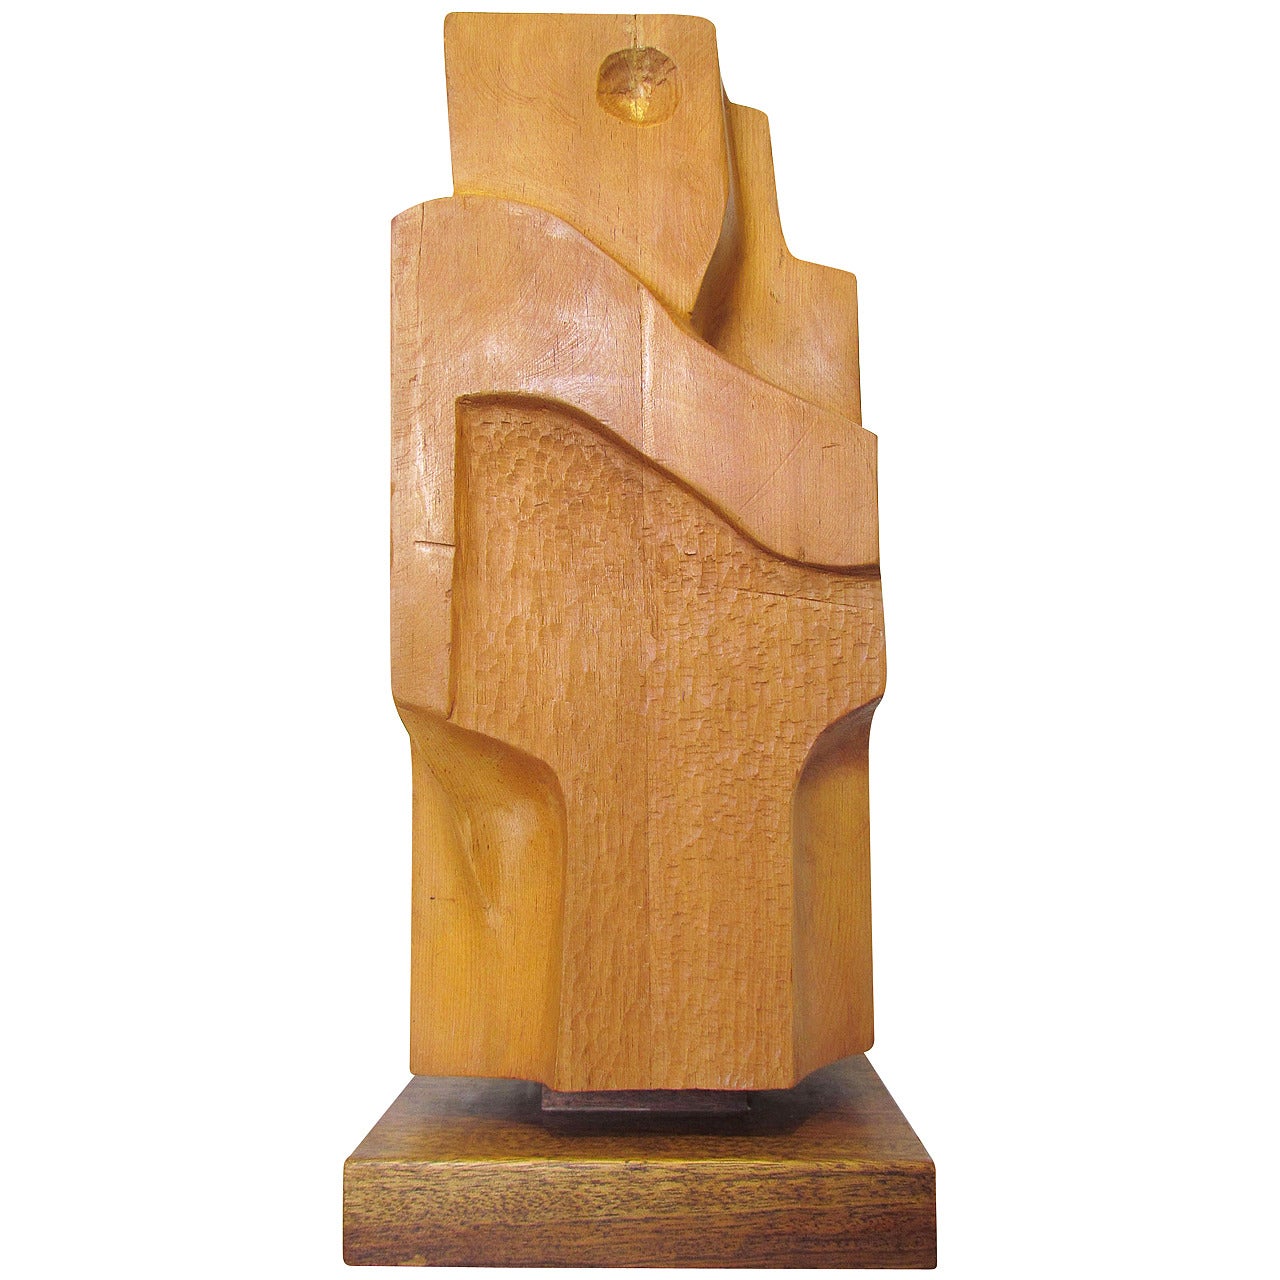 Abstract Hand-Carved Wood Sculpture Signed and Dated 1971